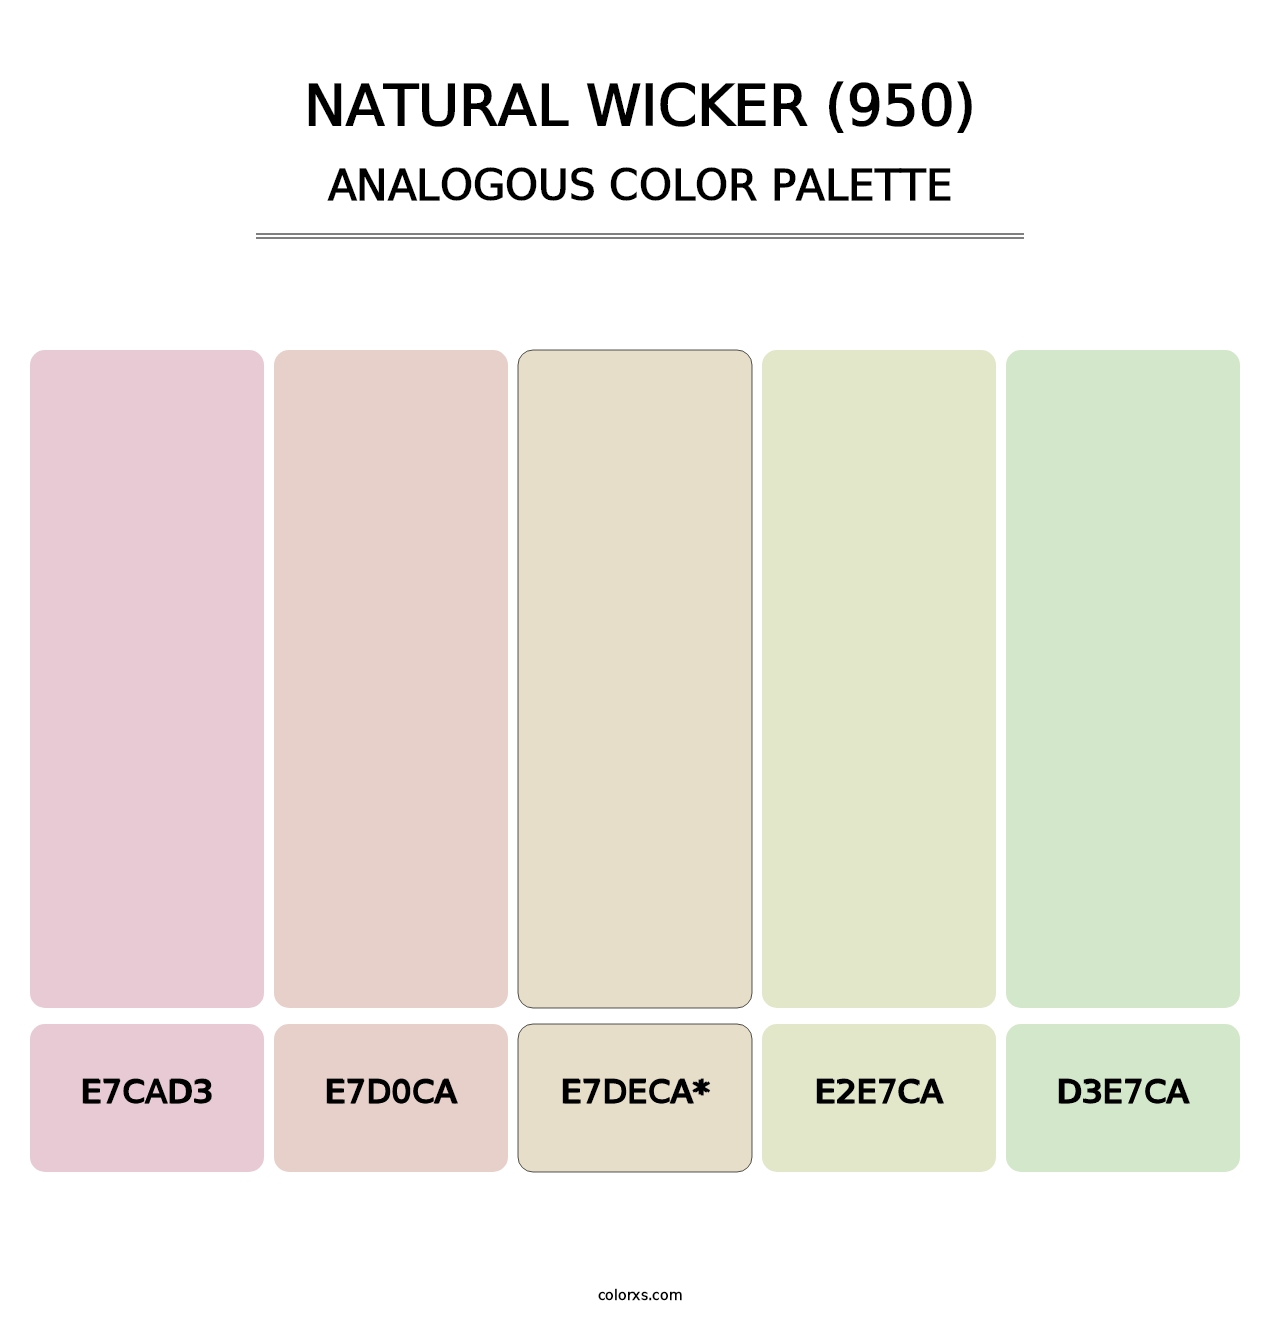 Natural Wicker (950) - Analogous Color Palette